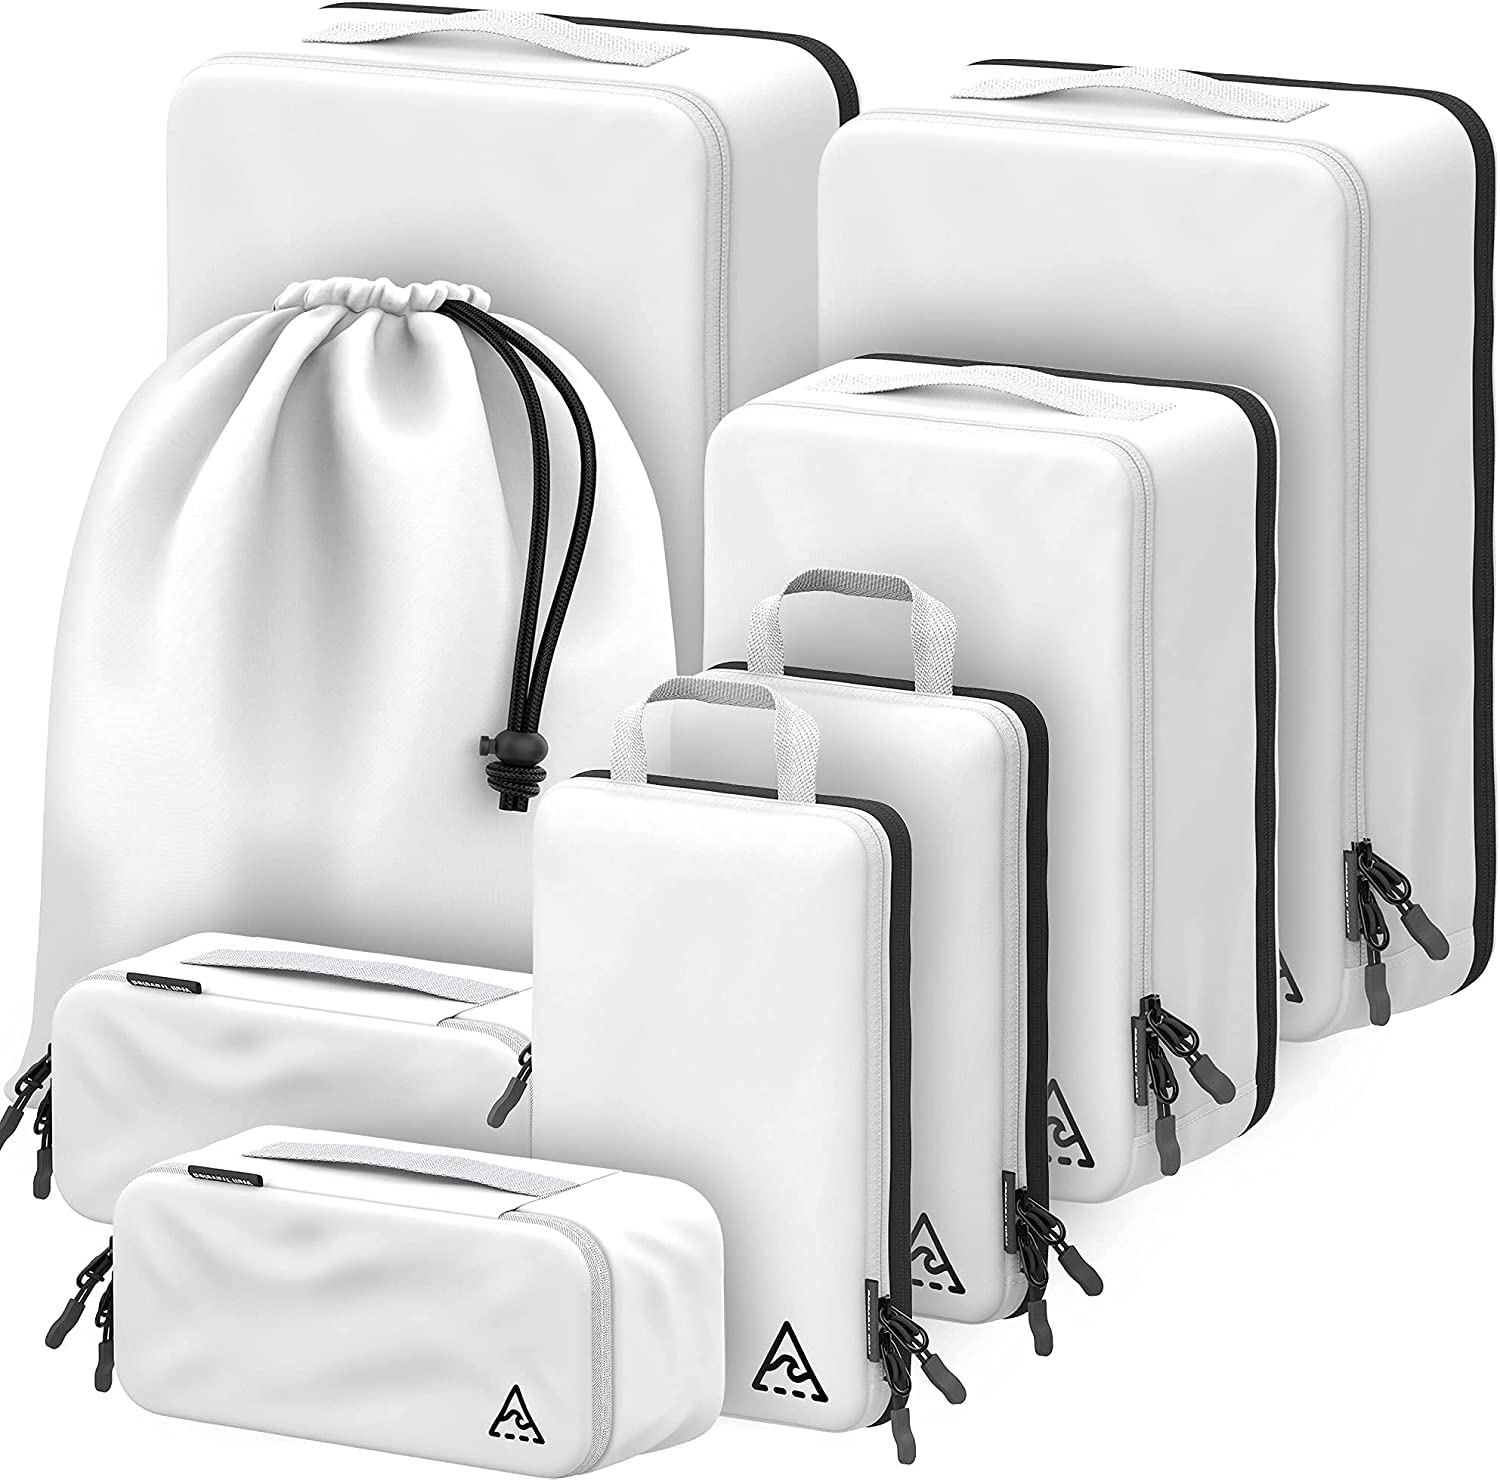 Deluxe set compression packing cubes